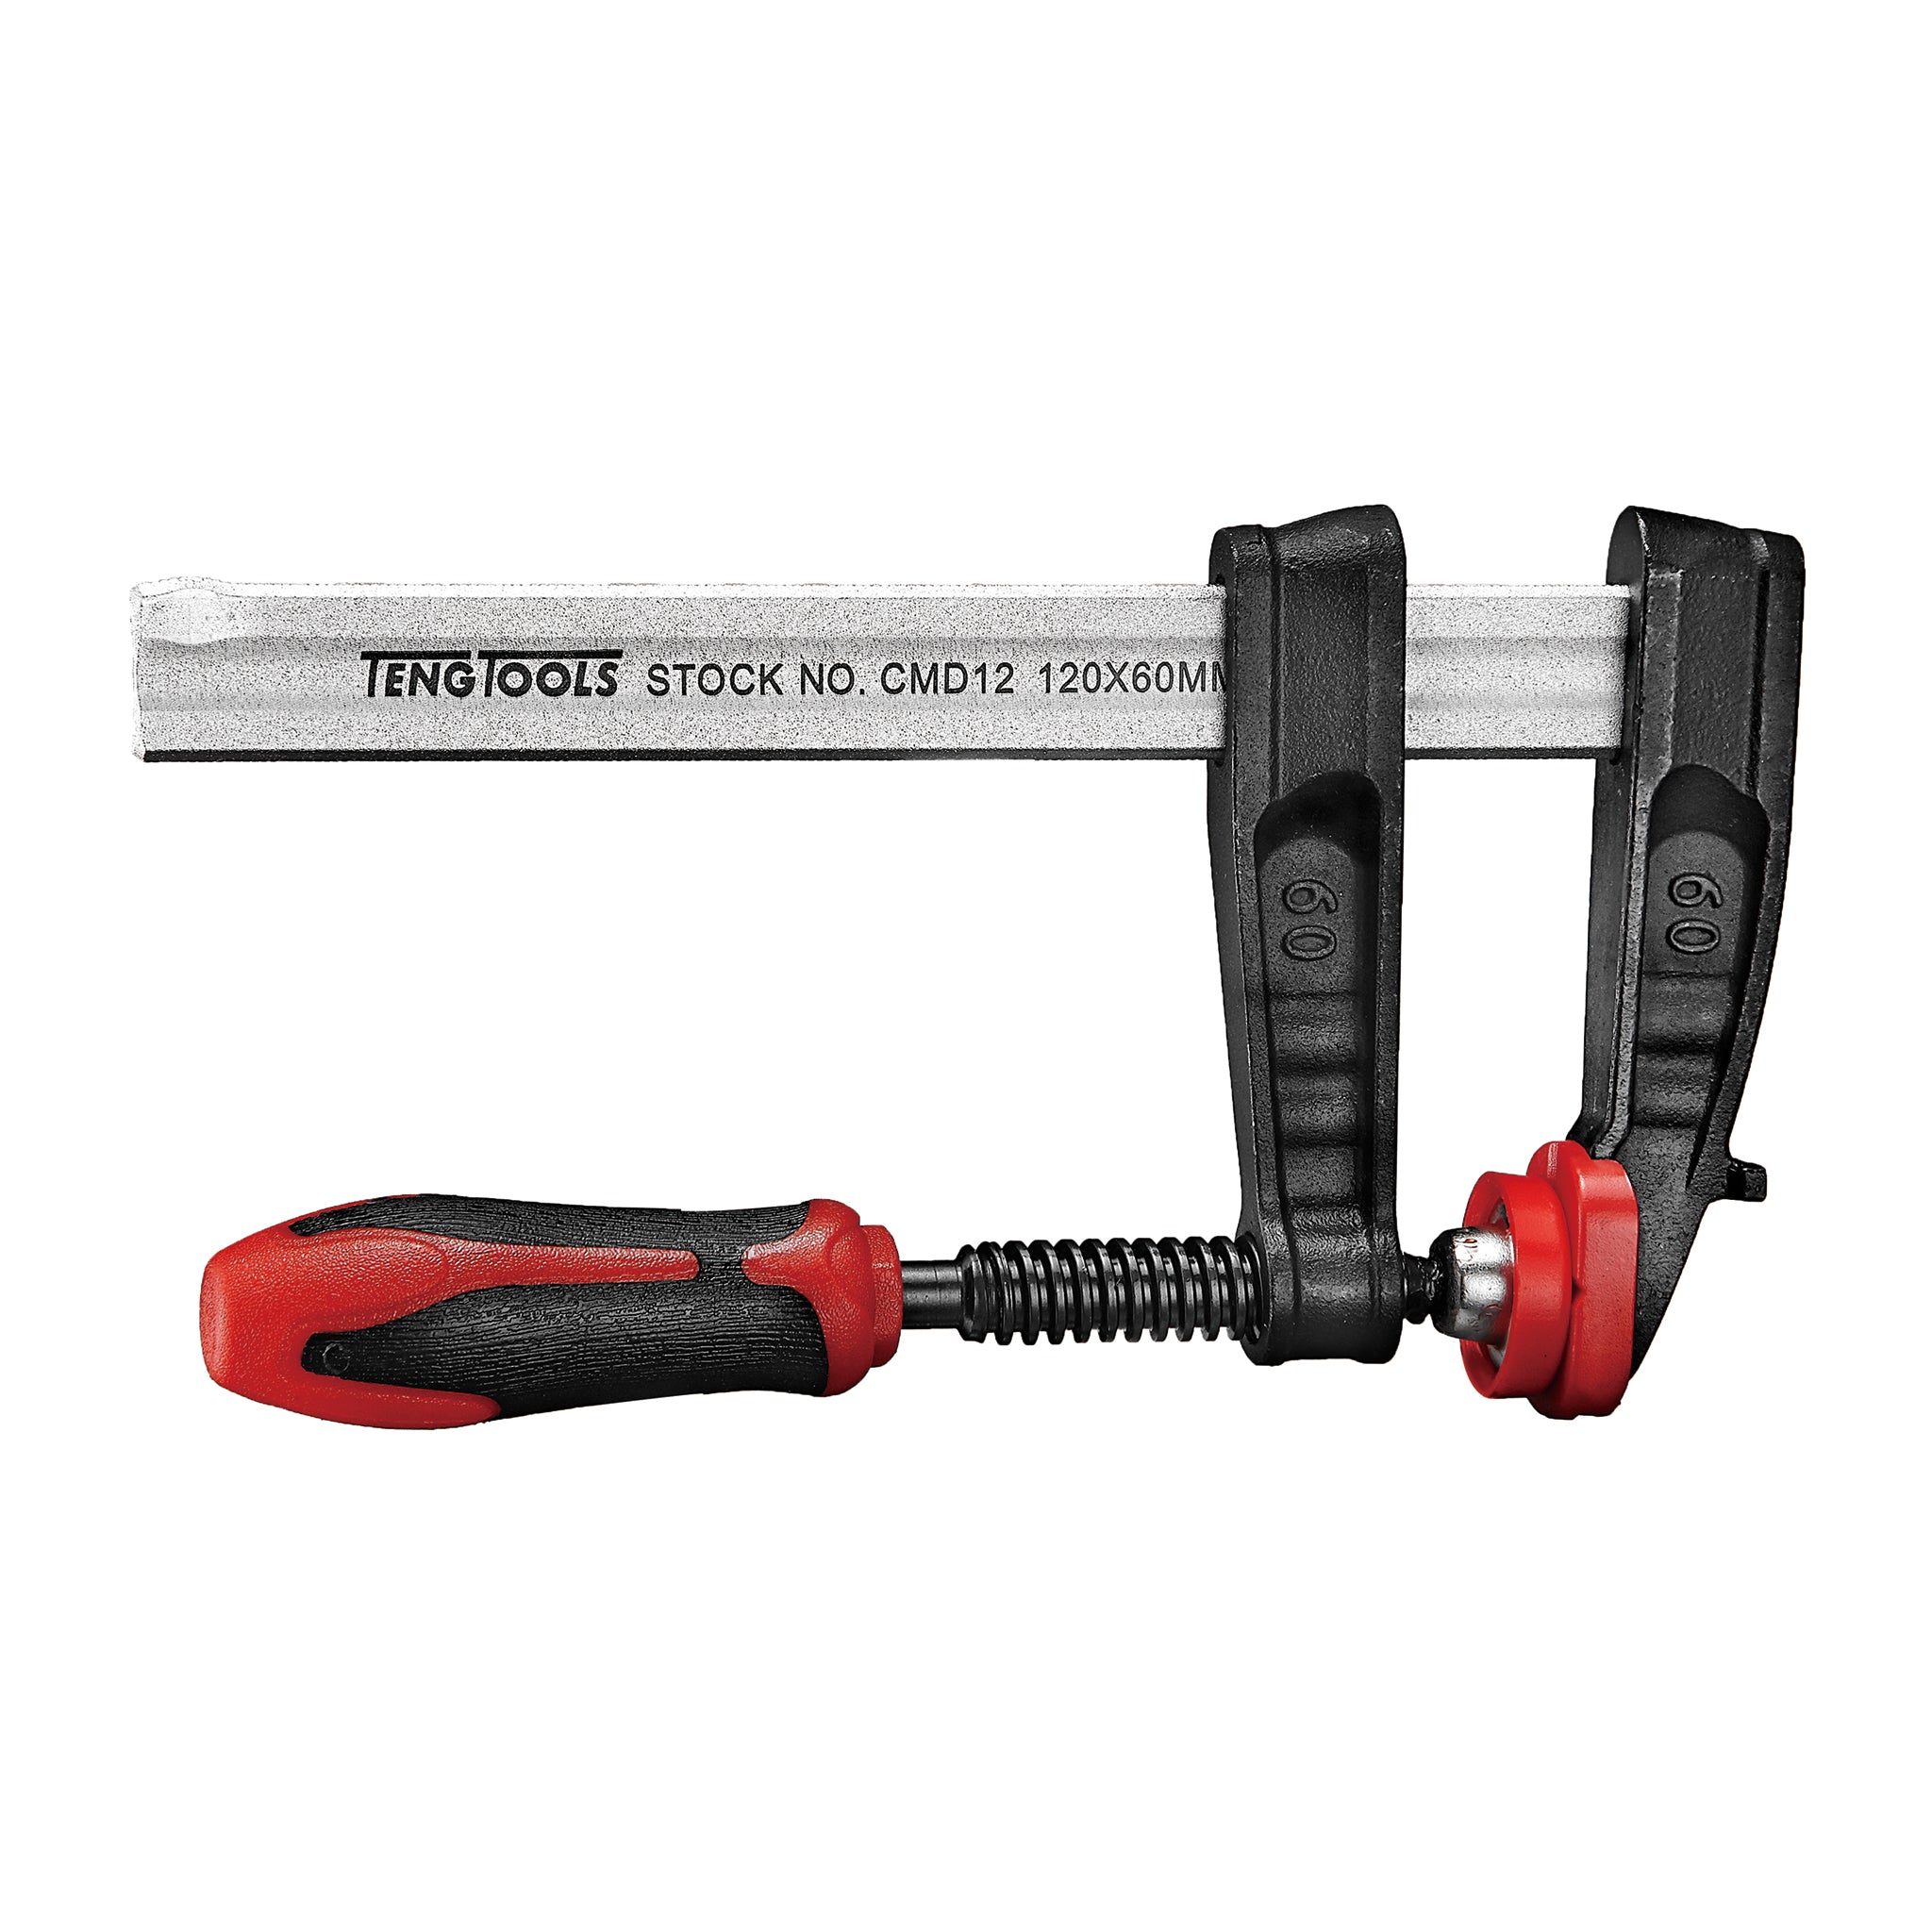 Teng Tools F-Clamps With Bi Material Handles - 800x120MM